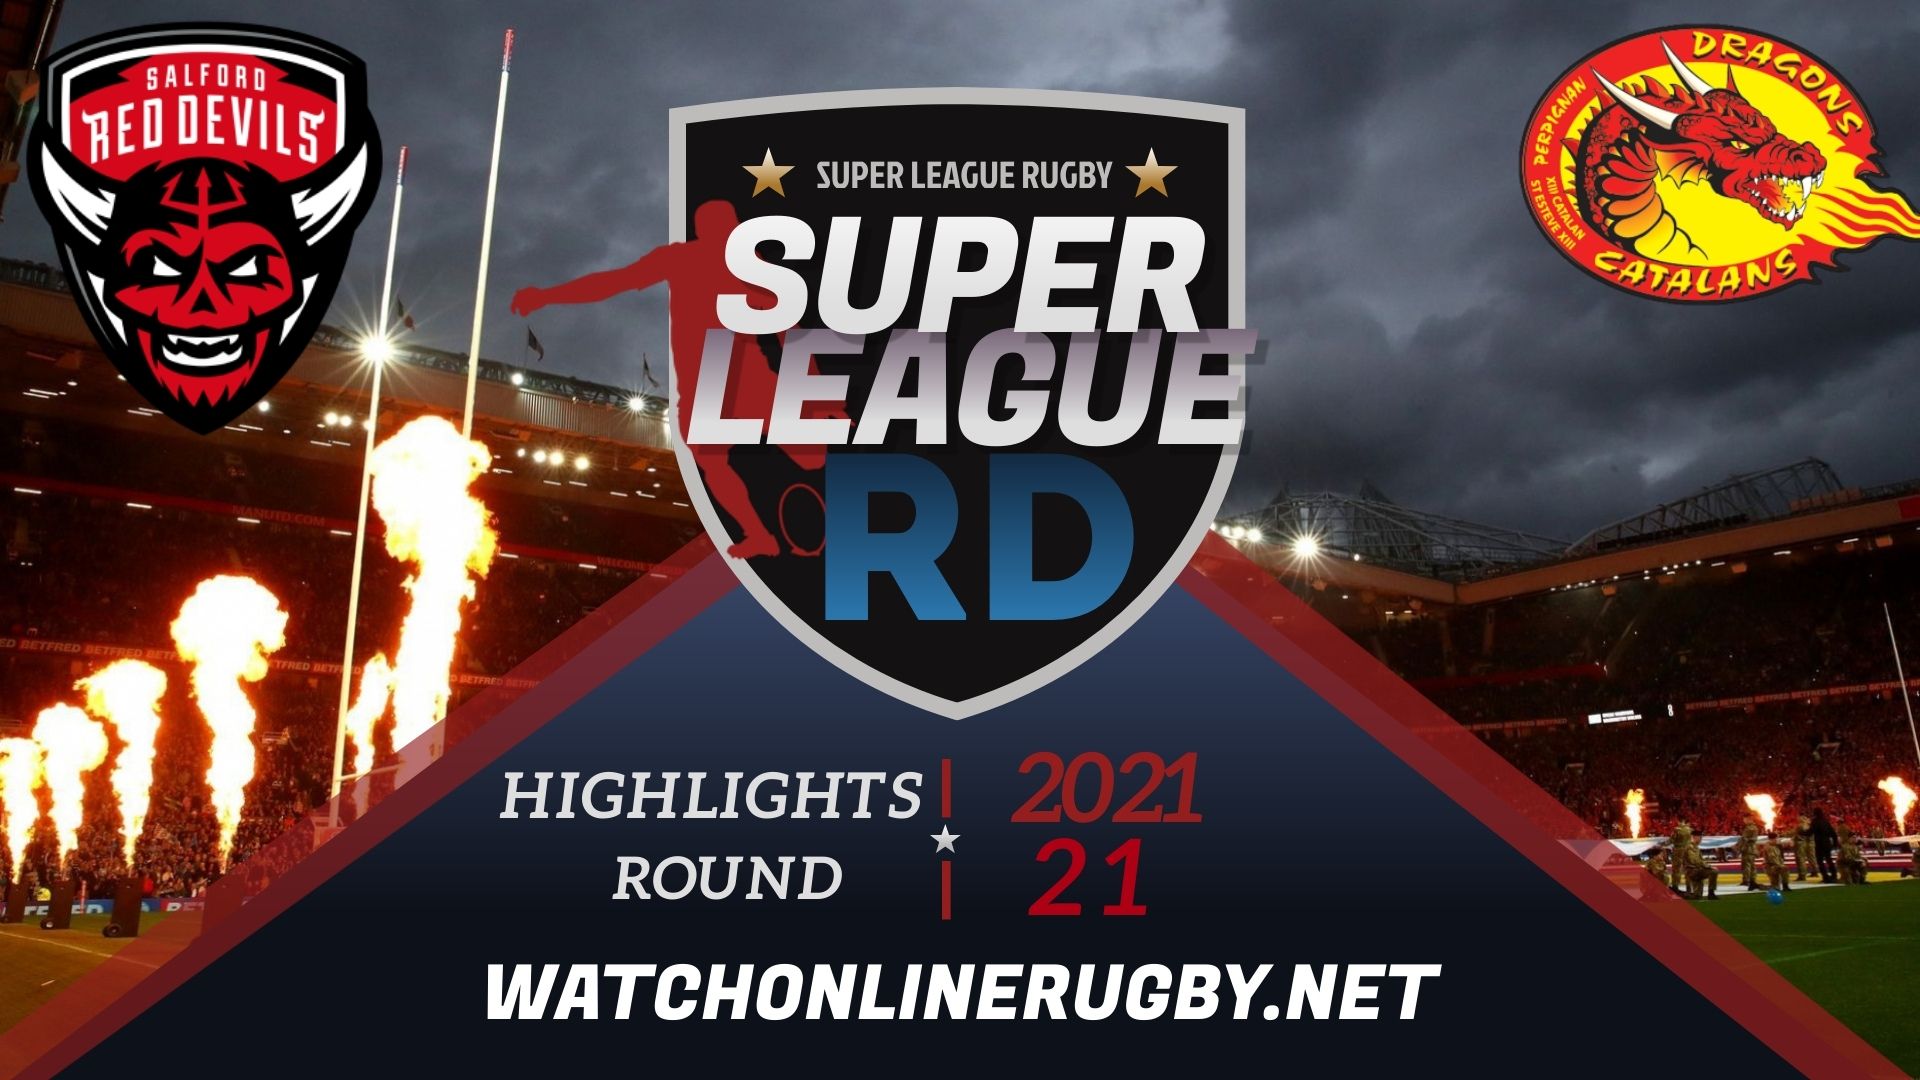 Salford Red Devils Vs Catalans Dragons Super League Rugby 2021 RD 21